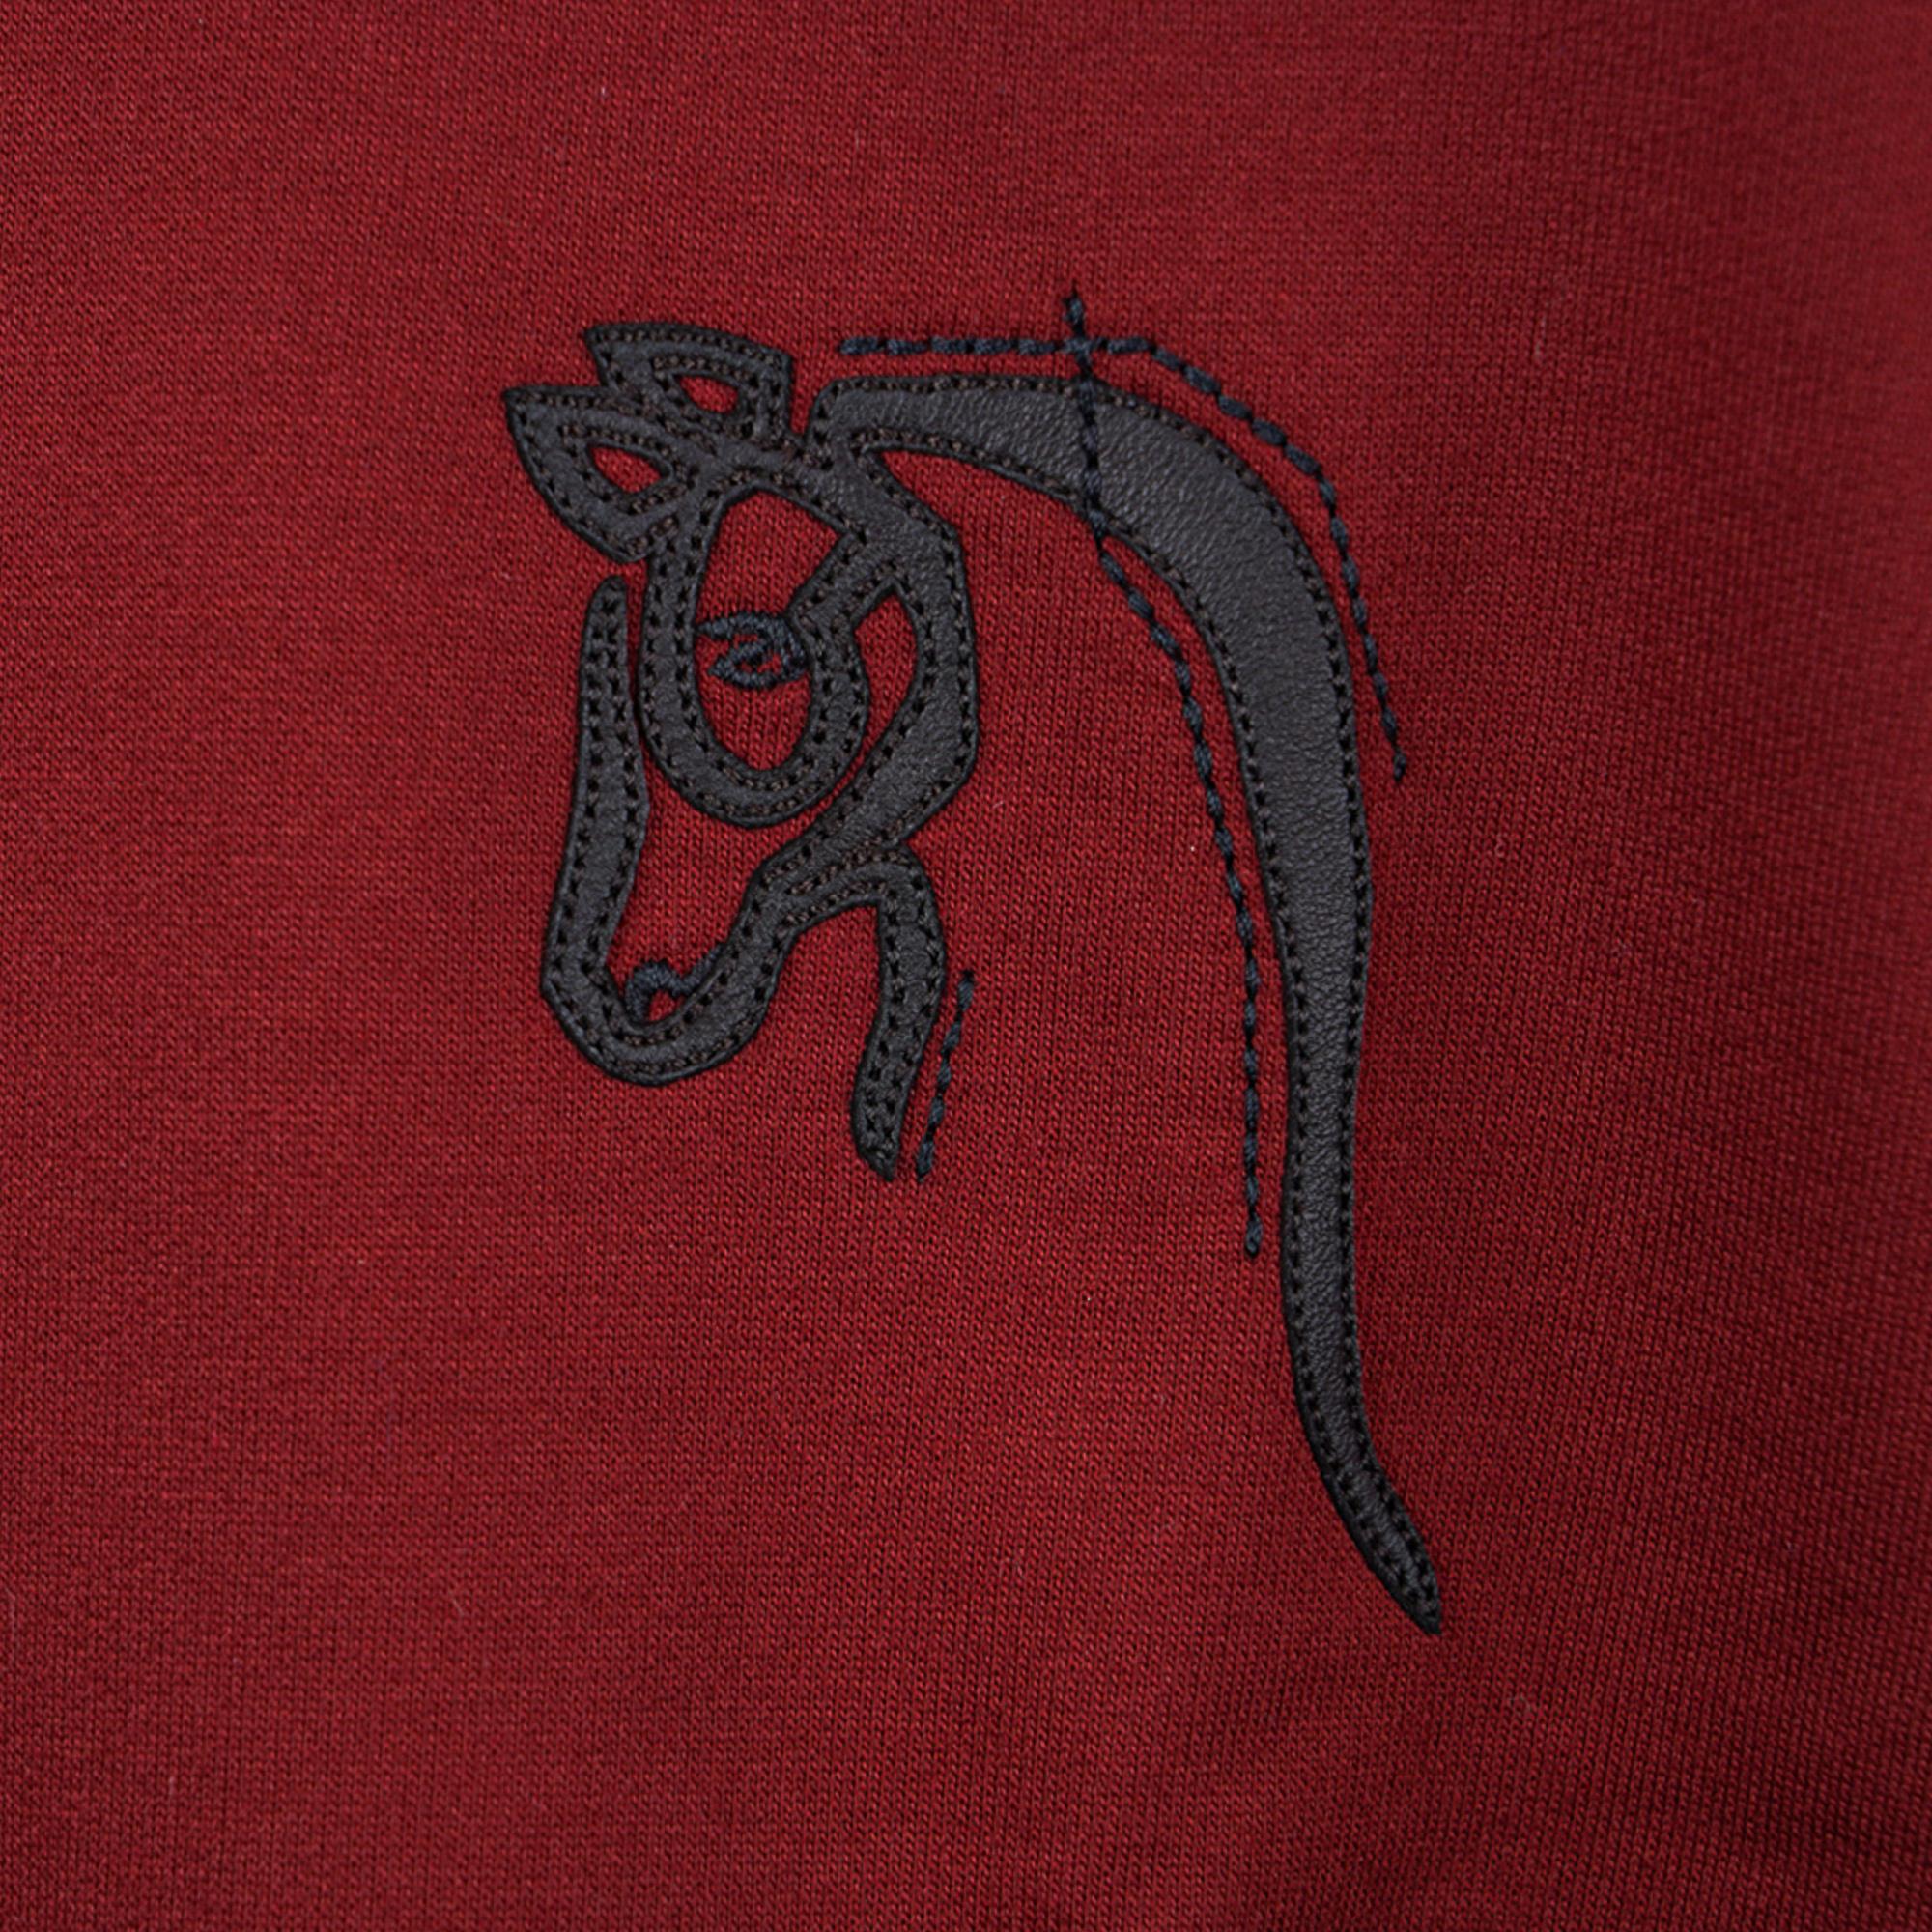 Mightychic offers an Hermes Mini Patch Cuir T-Shirt featured in Rouge H.
Depicts a cheval au trait, a draft horse, in lambskin leather.
Short sleeve T with crew neck.
Fabric is cotton.
NEW or NEVER WORN
final sale

SIZE M

TOP MEASURES:
LENGTH